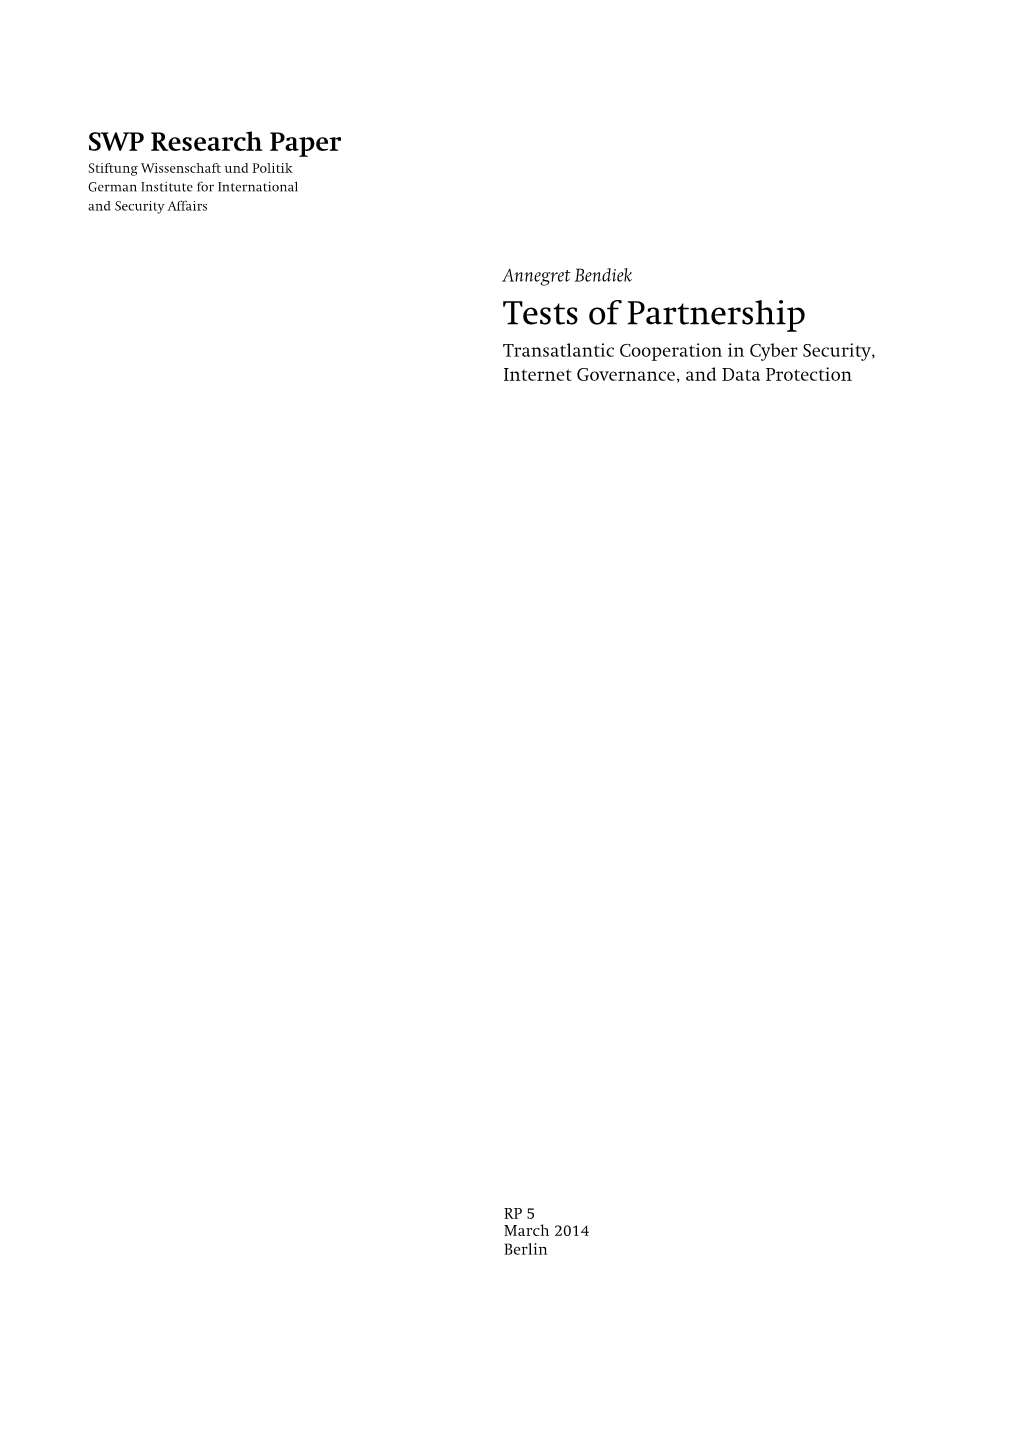 Tests of Partnership. Transatlantic Cooperation in Cyber Security, Internet Governance, and Data Protection